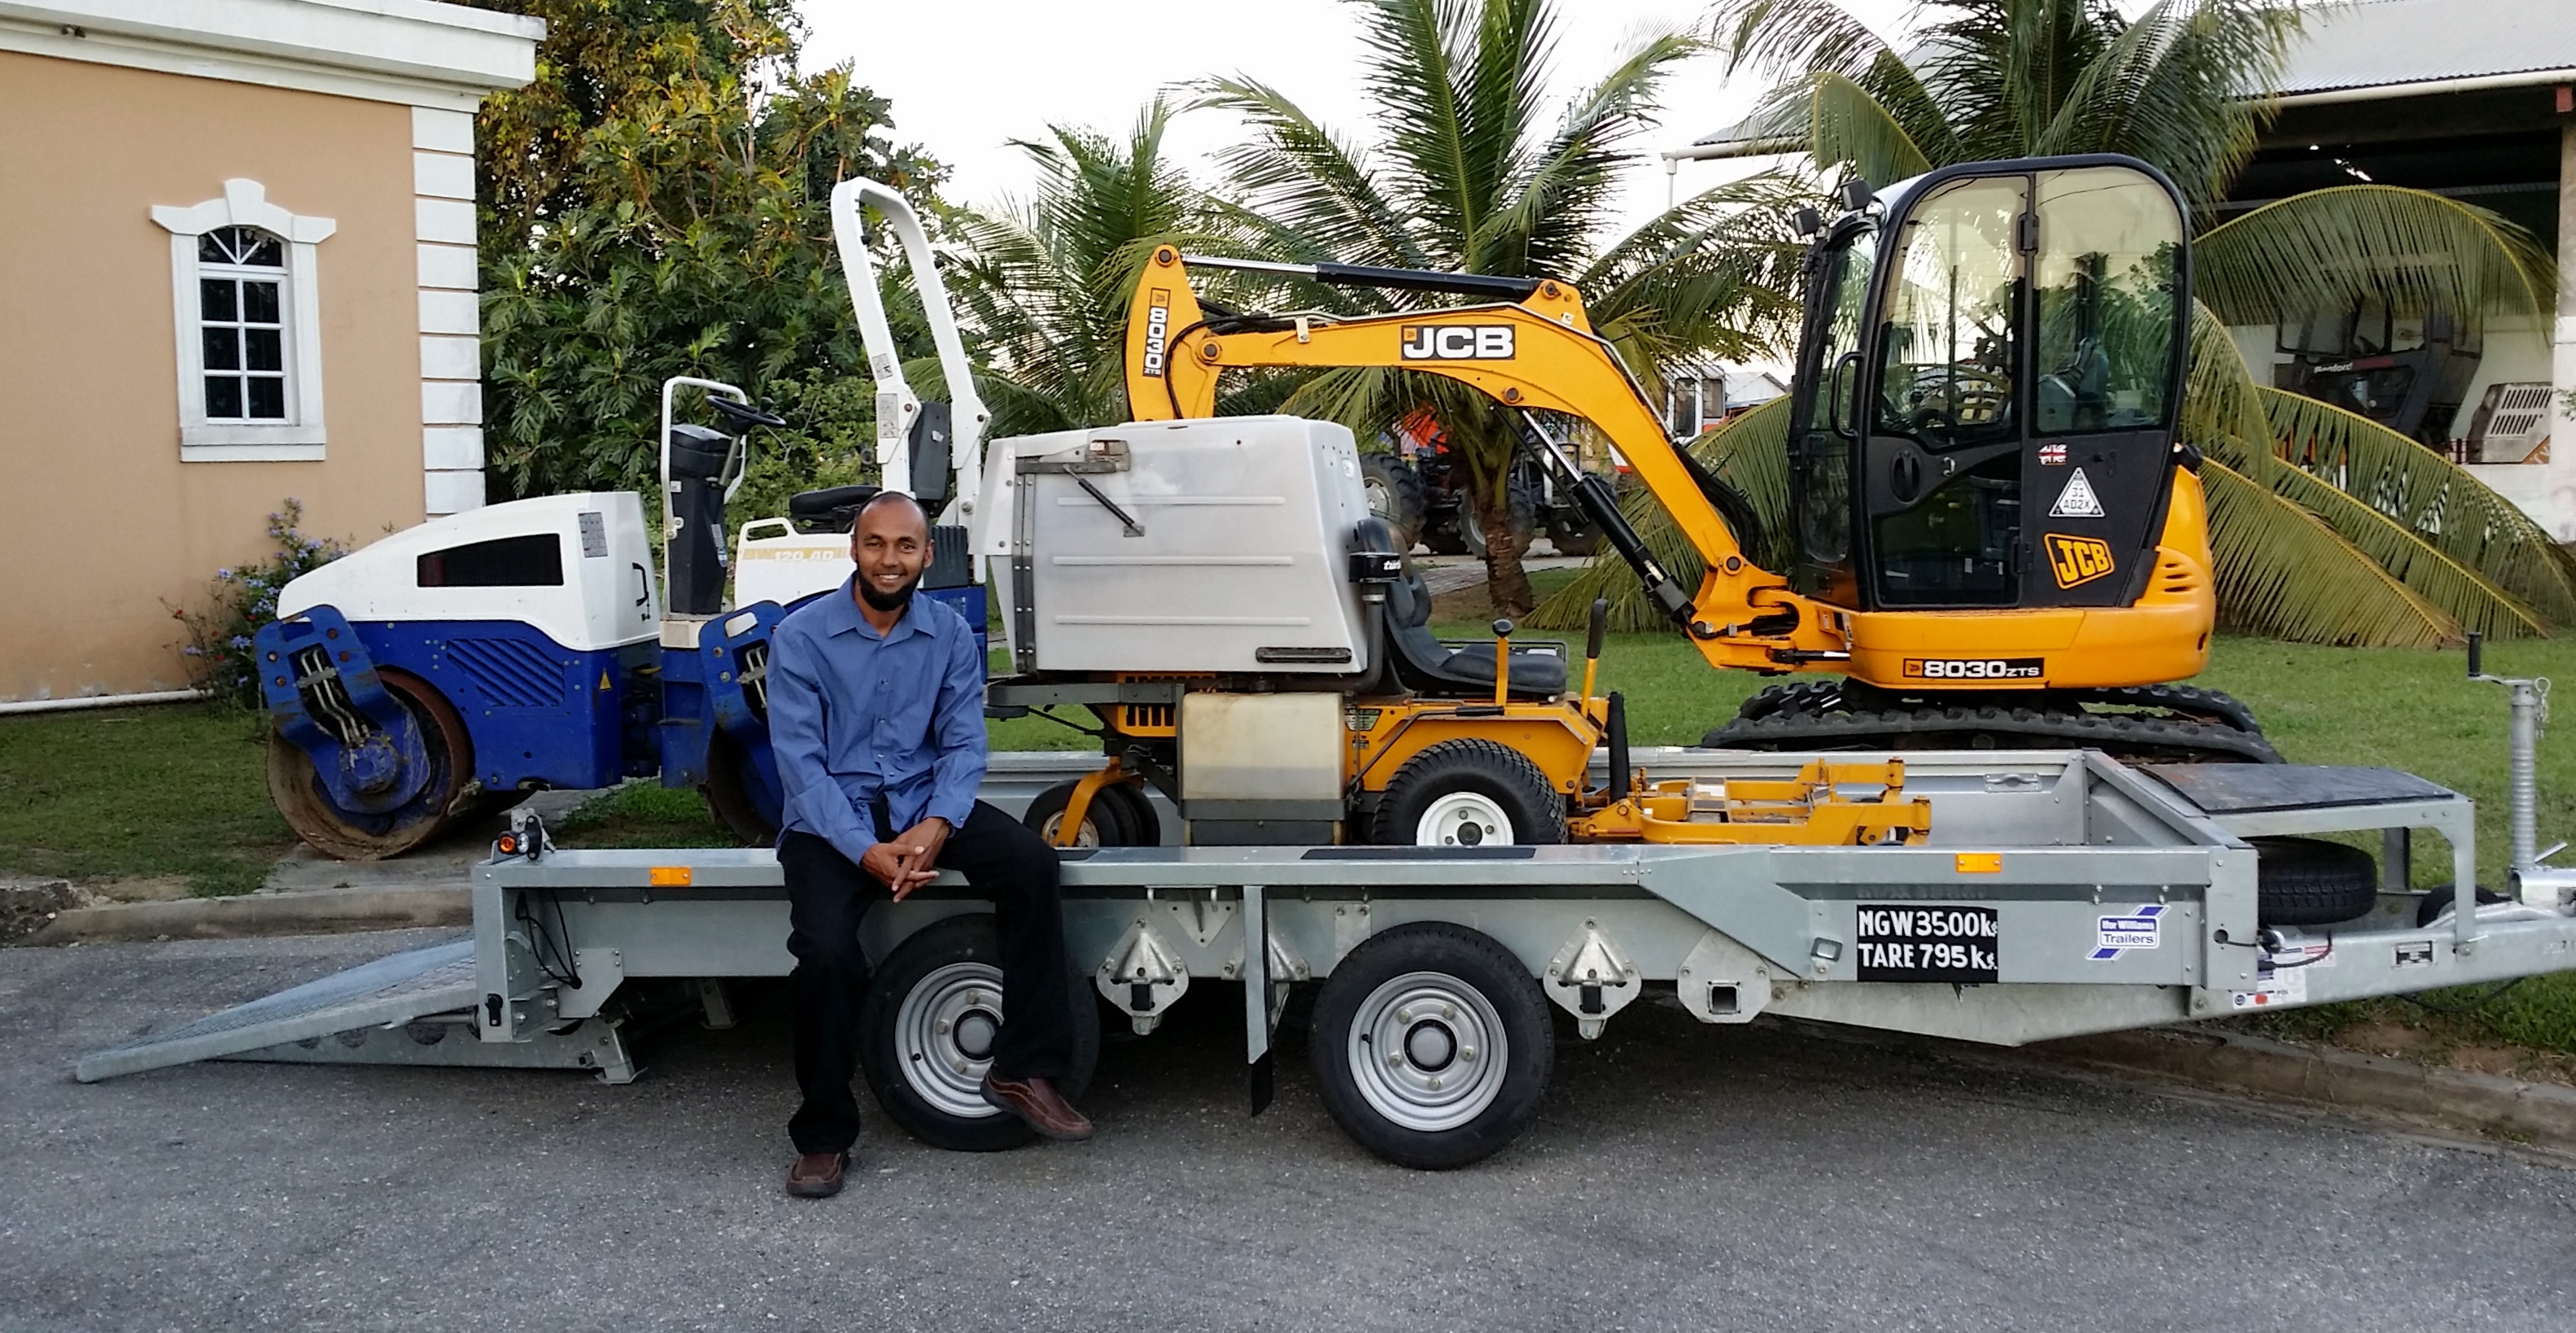 Top trailer maker reaches paradise thanks to new Caribbean distributor